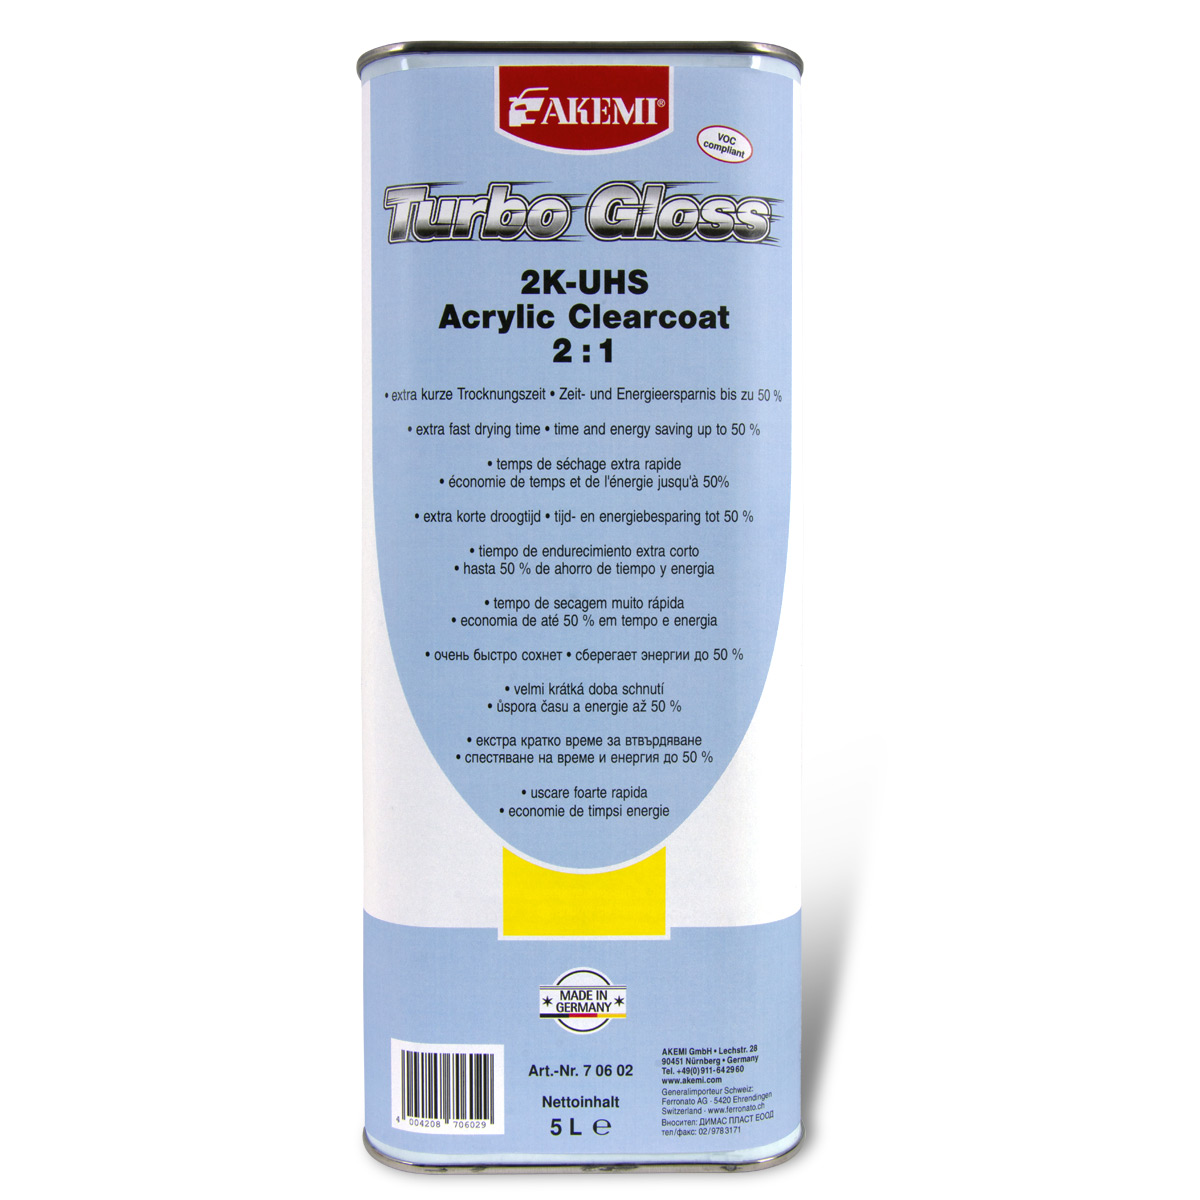 Turbo Gloss 2K-UHS Clearcoat 2:1